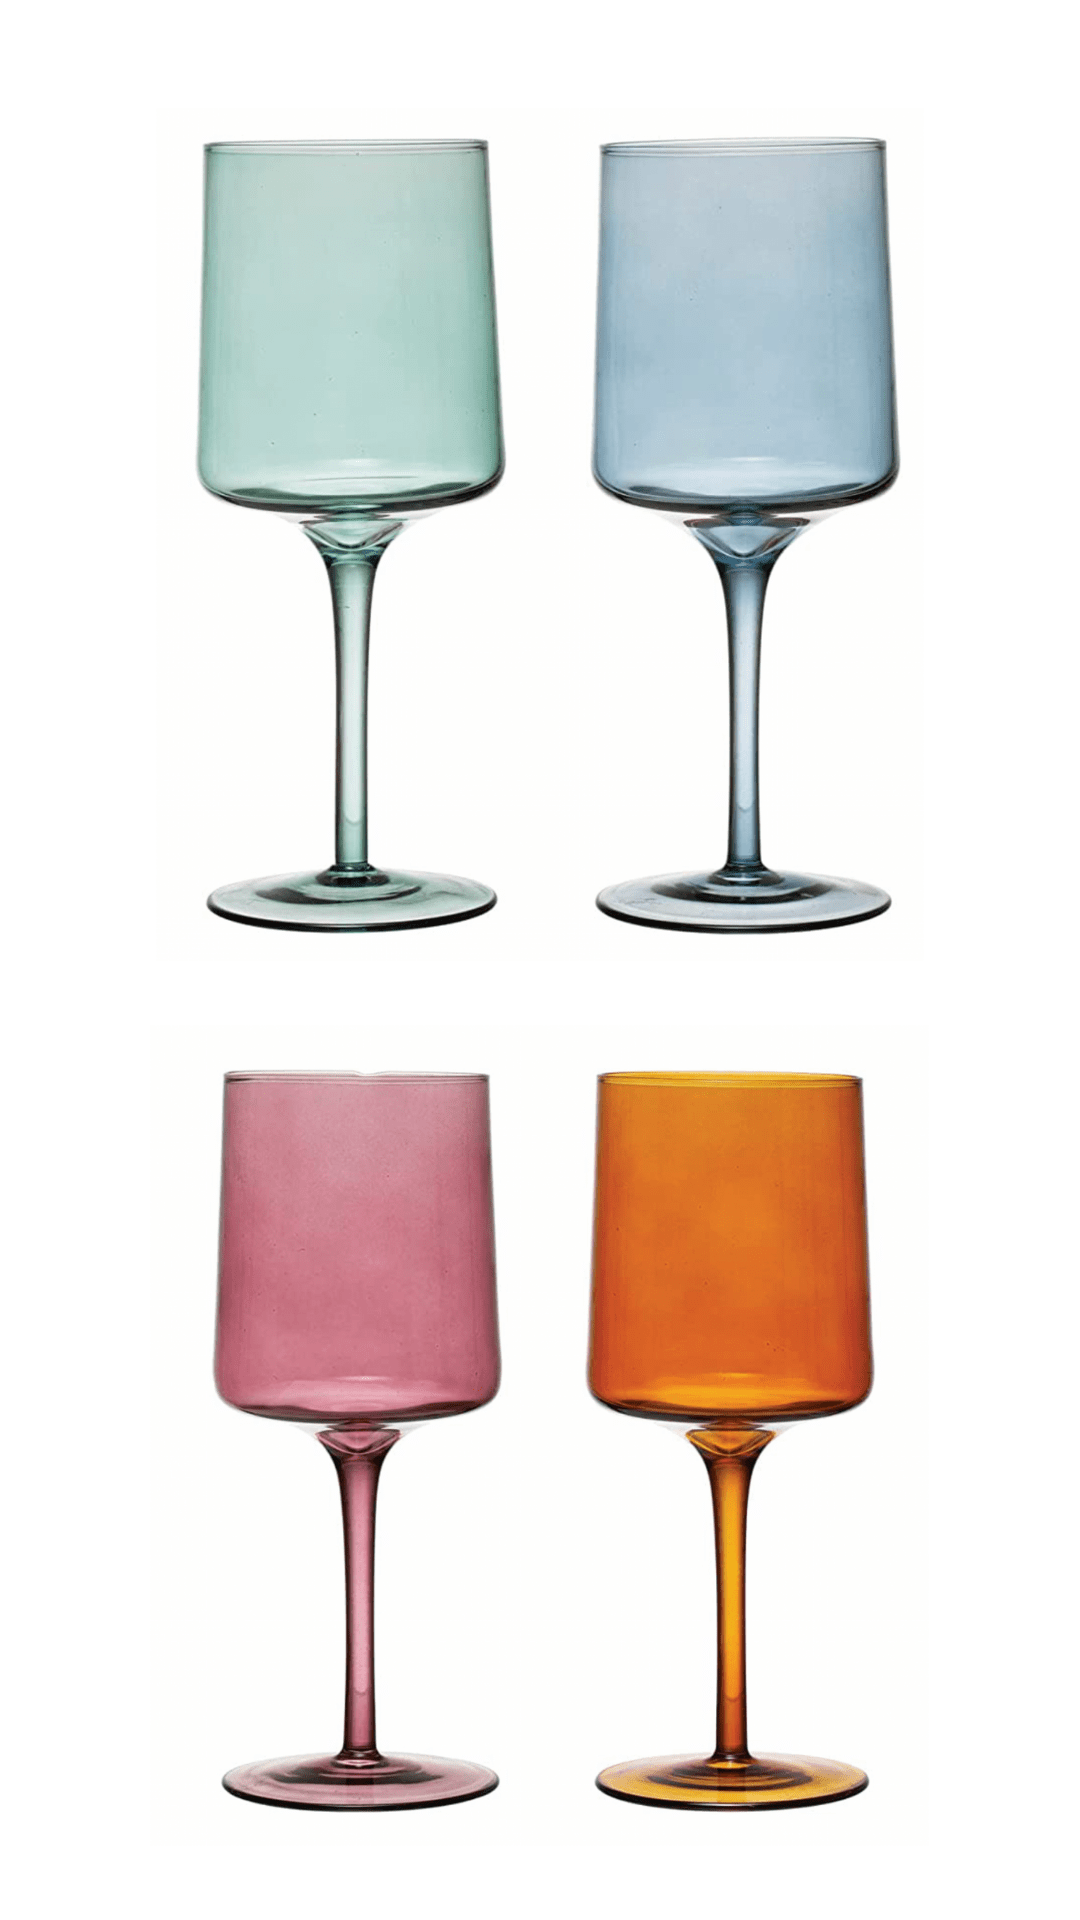 4 multicolored wine glasses, from left to right, top to bottom, green, blue, pink, and orange